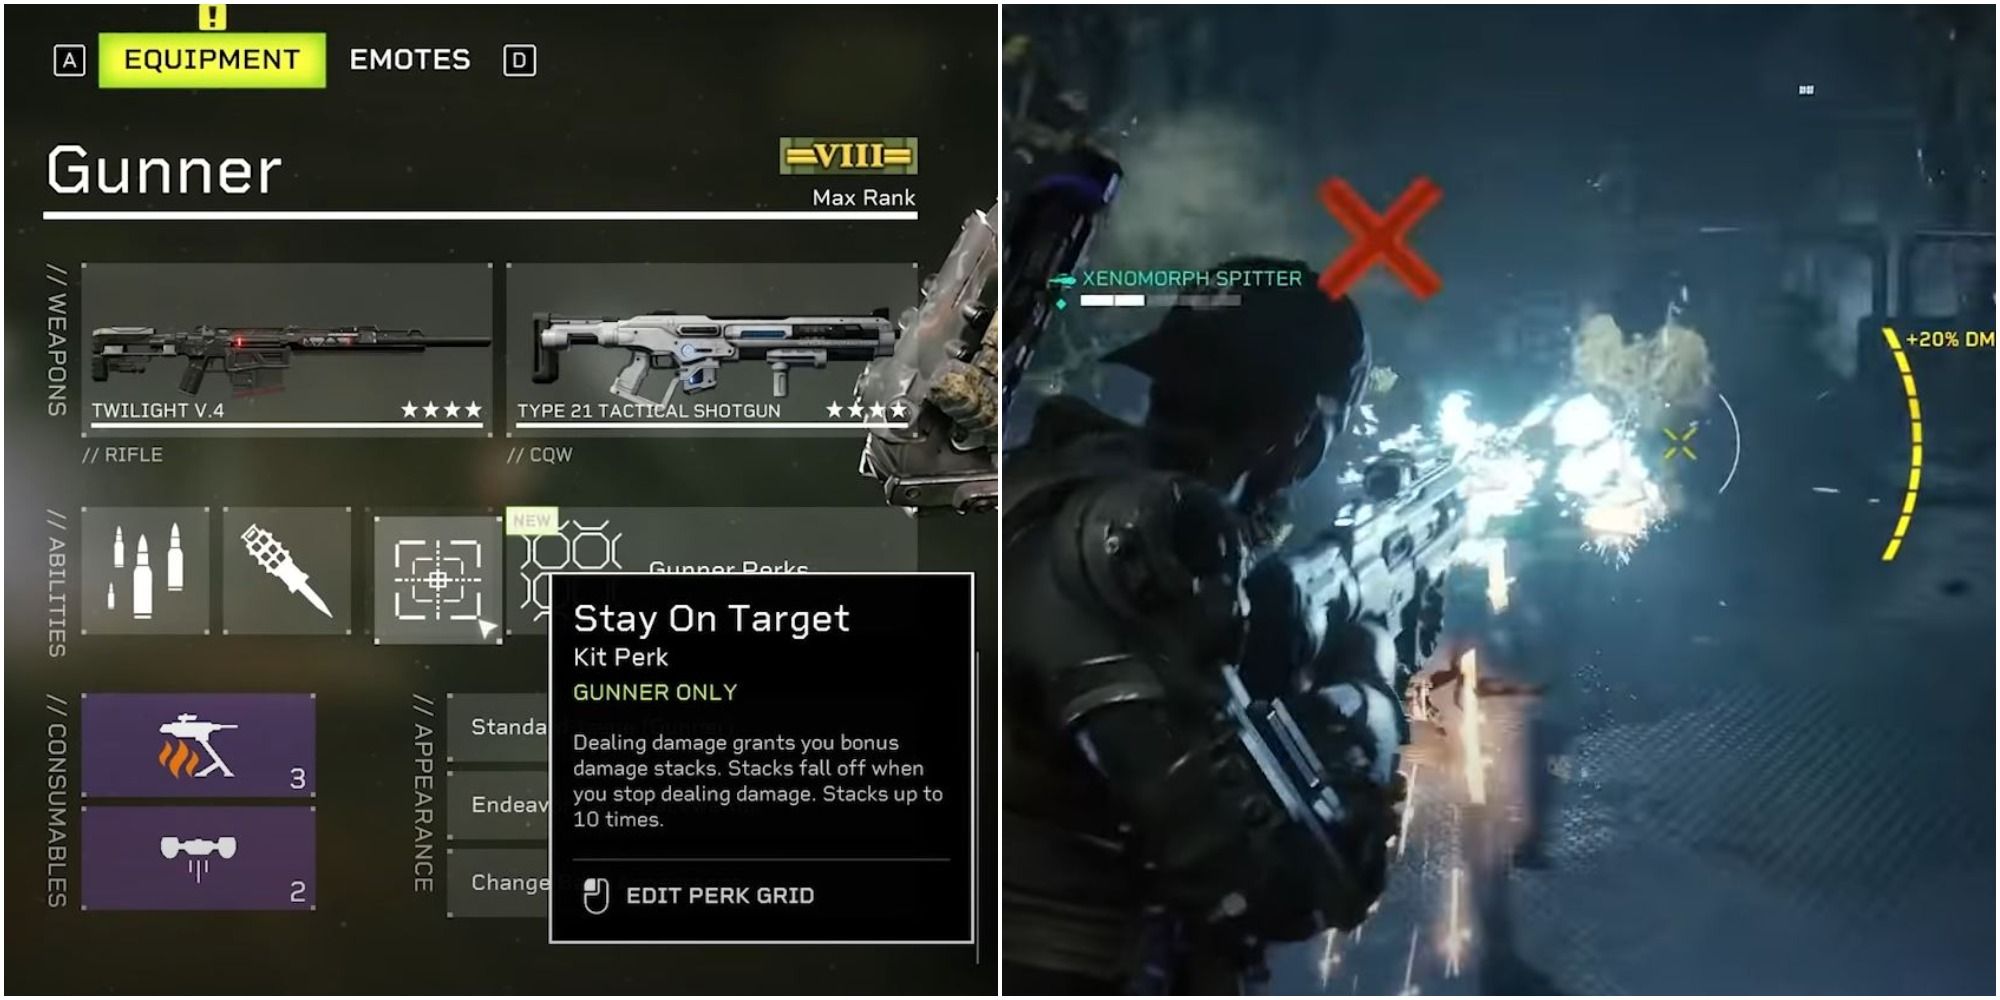 Explanation of the Stay on Target passive ability in Aliens: Fireteam Elite along with gameplay showing the damage bonus